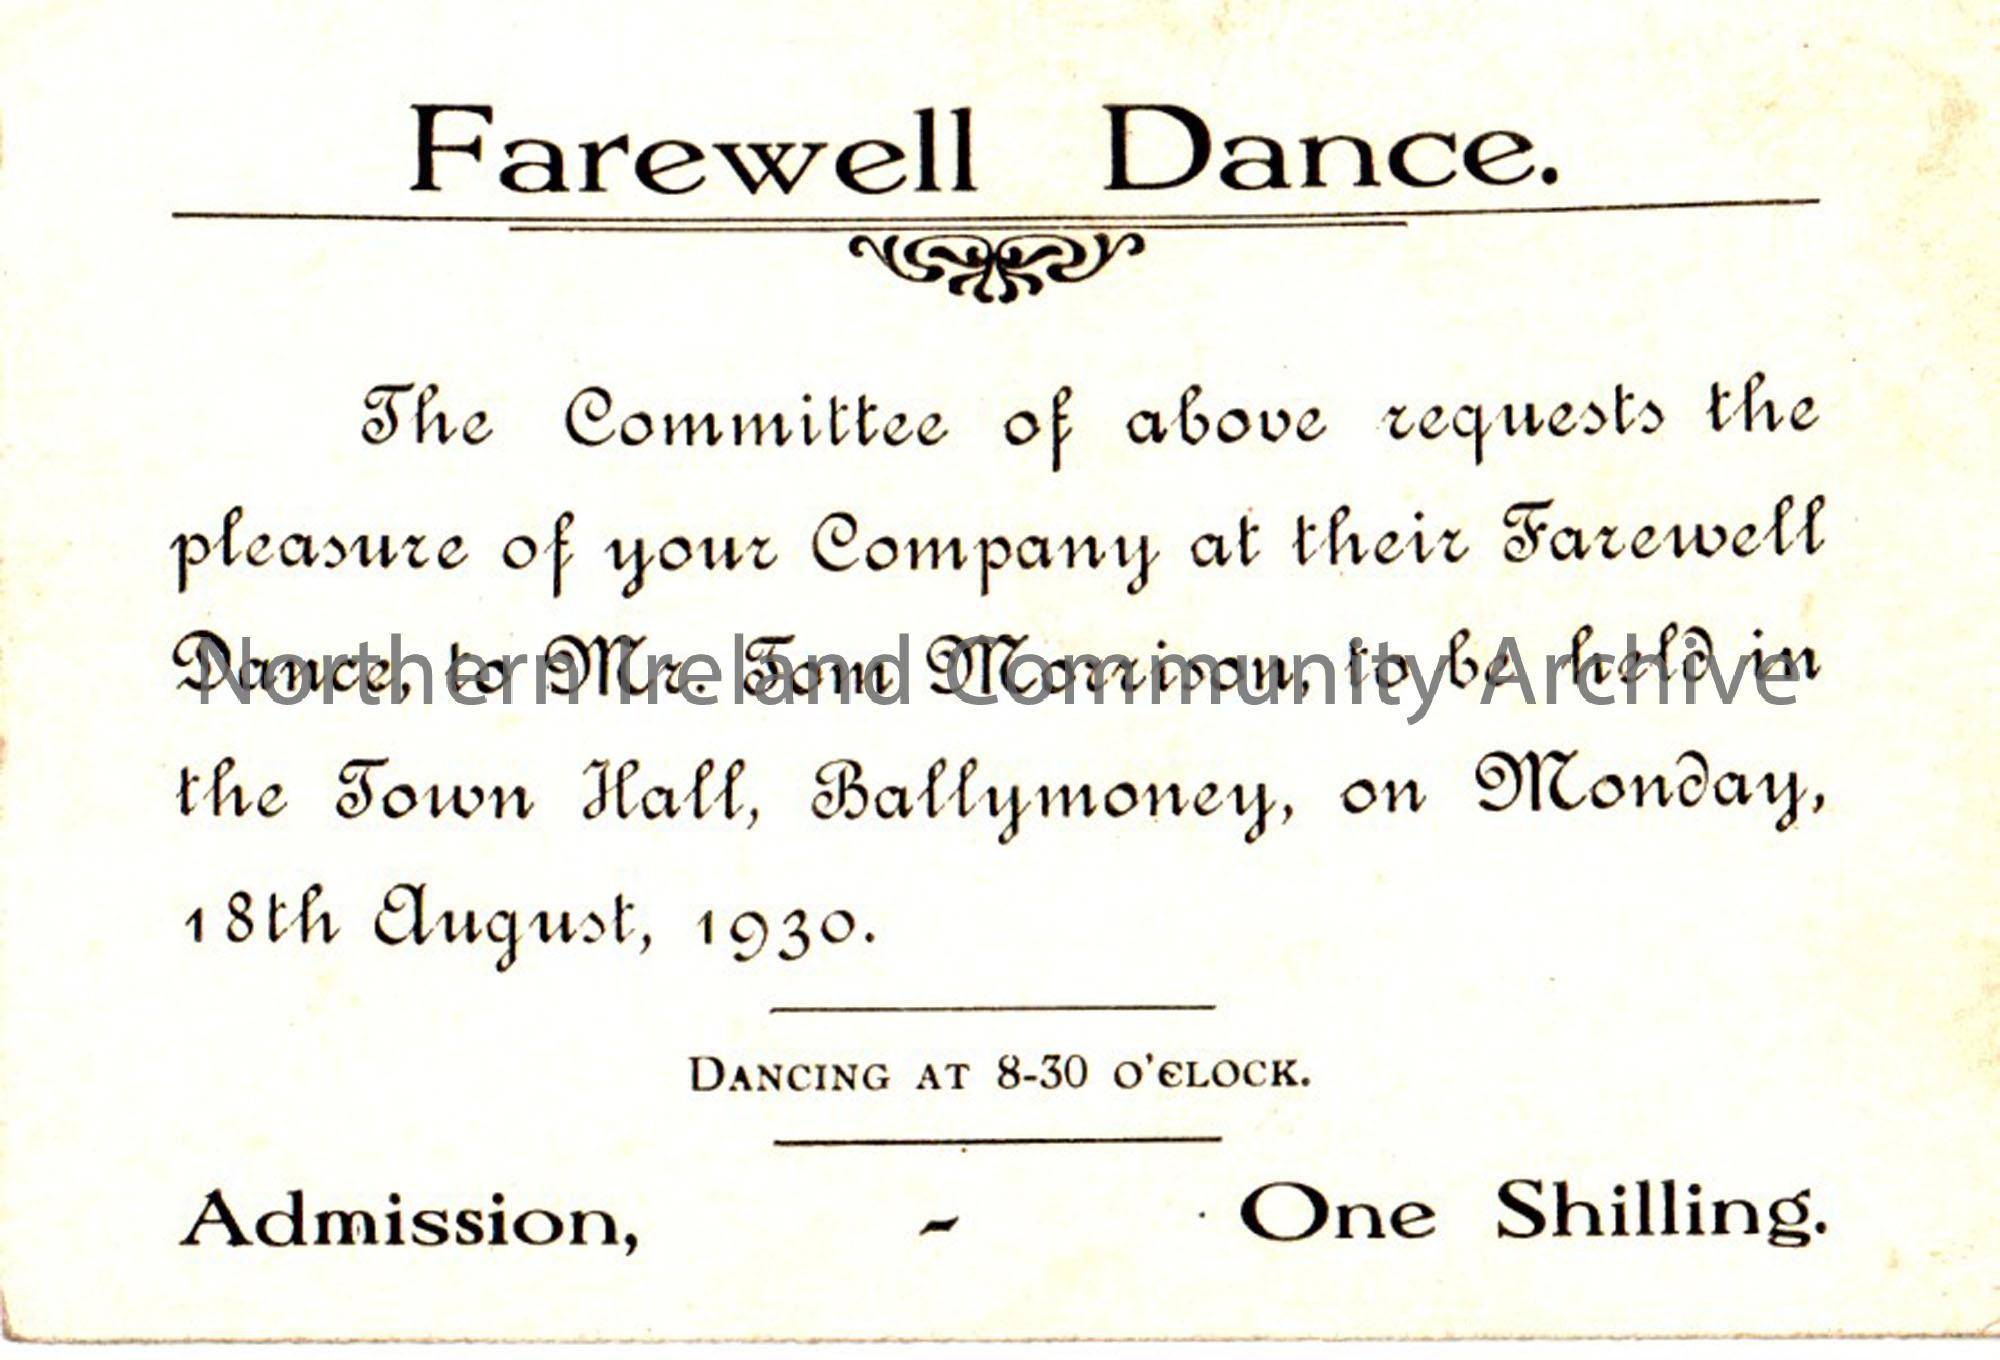 Invitation to a Farewell Dance for Mr. Tom Morrison, held in the Town Hall, Ballymoney, on Friday 18th August 1930